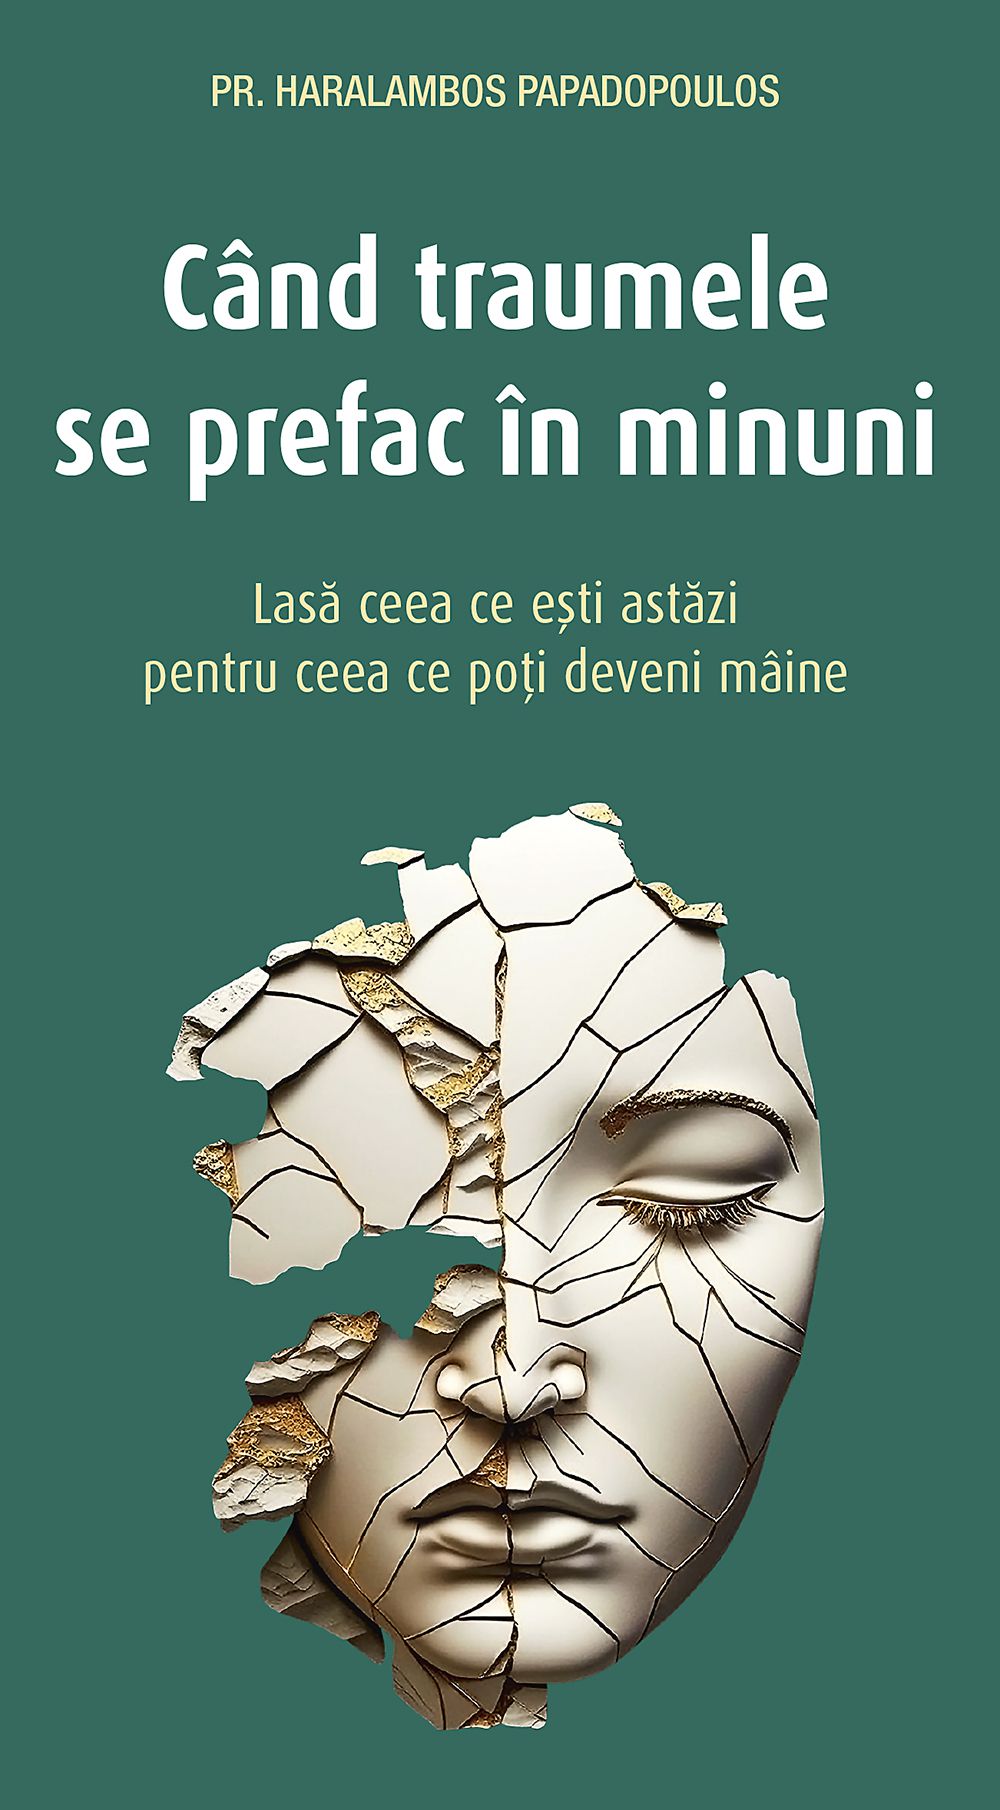 Cand traumele se prefac in minuni